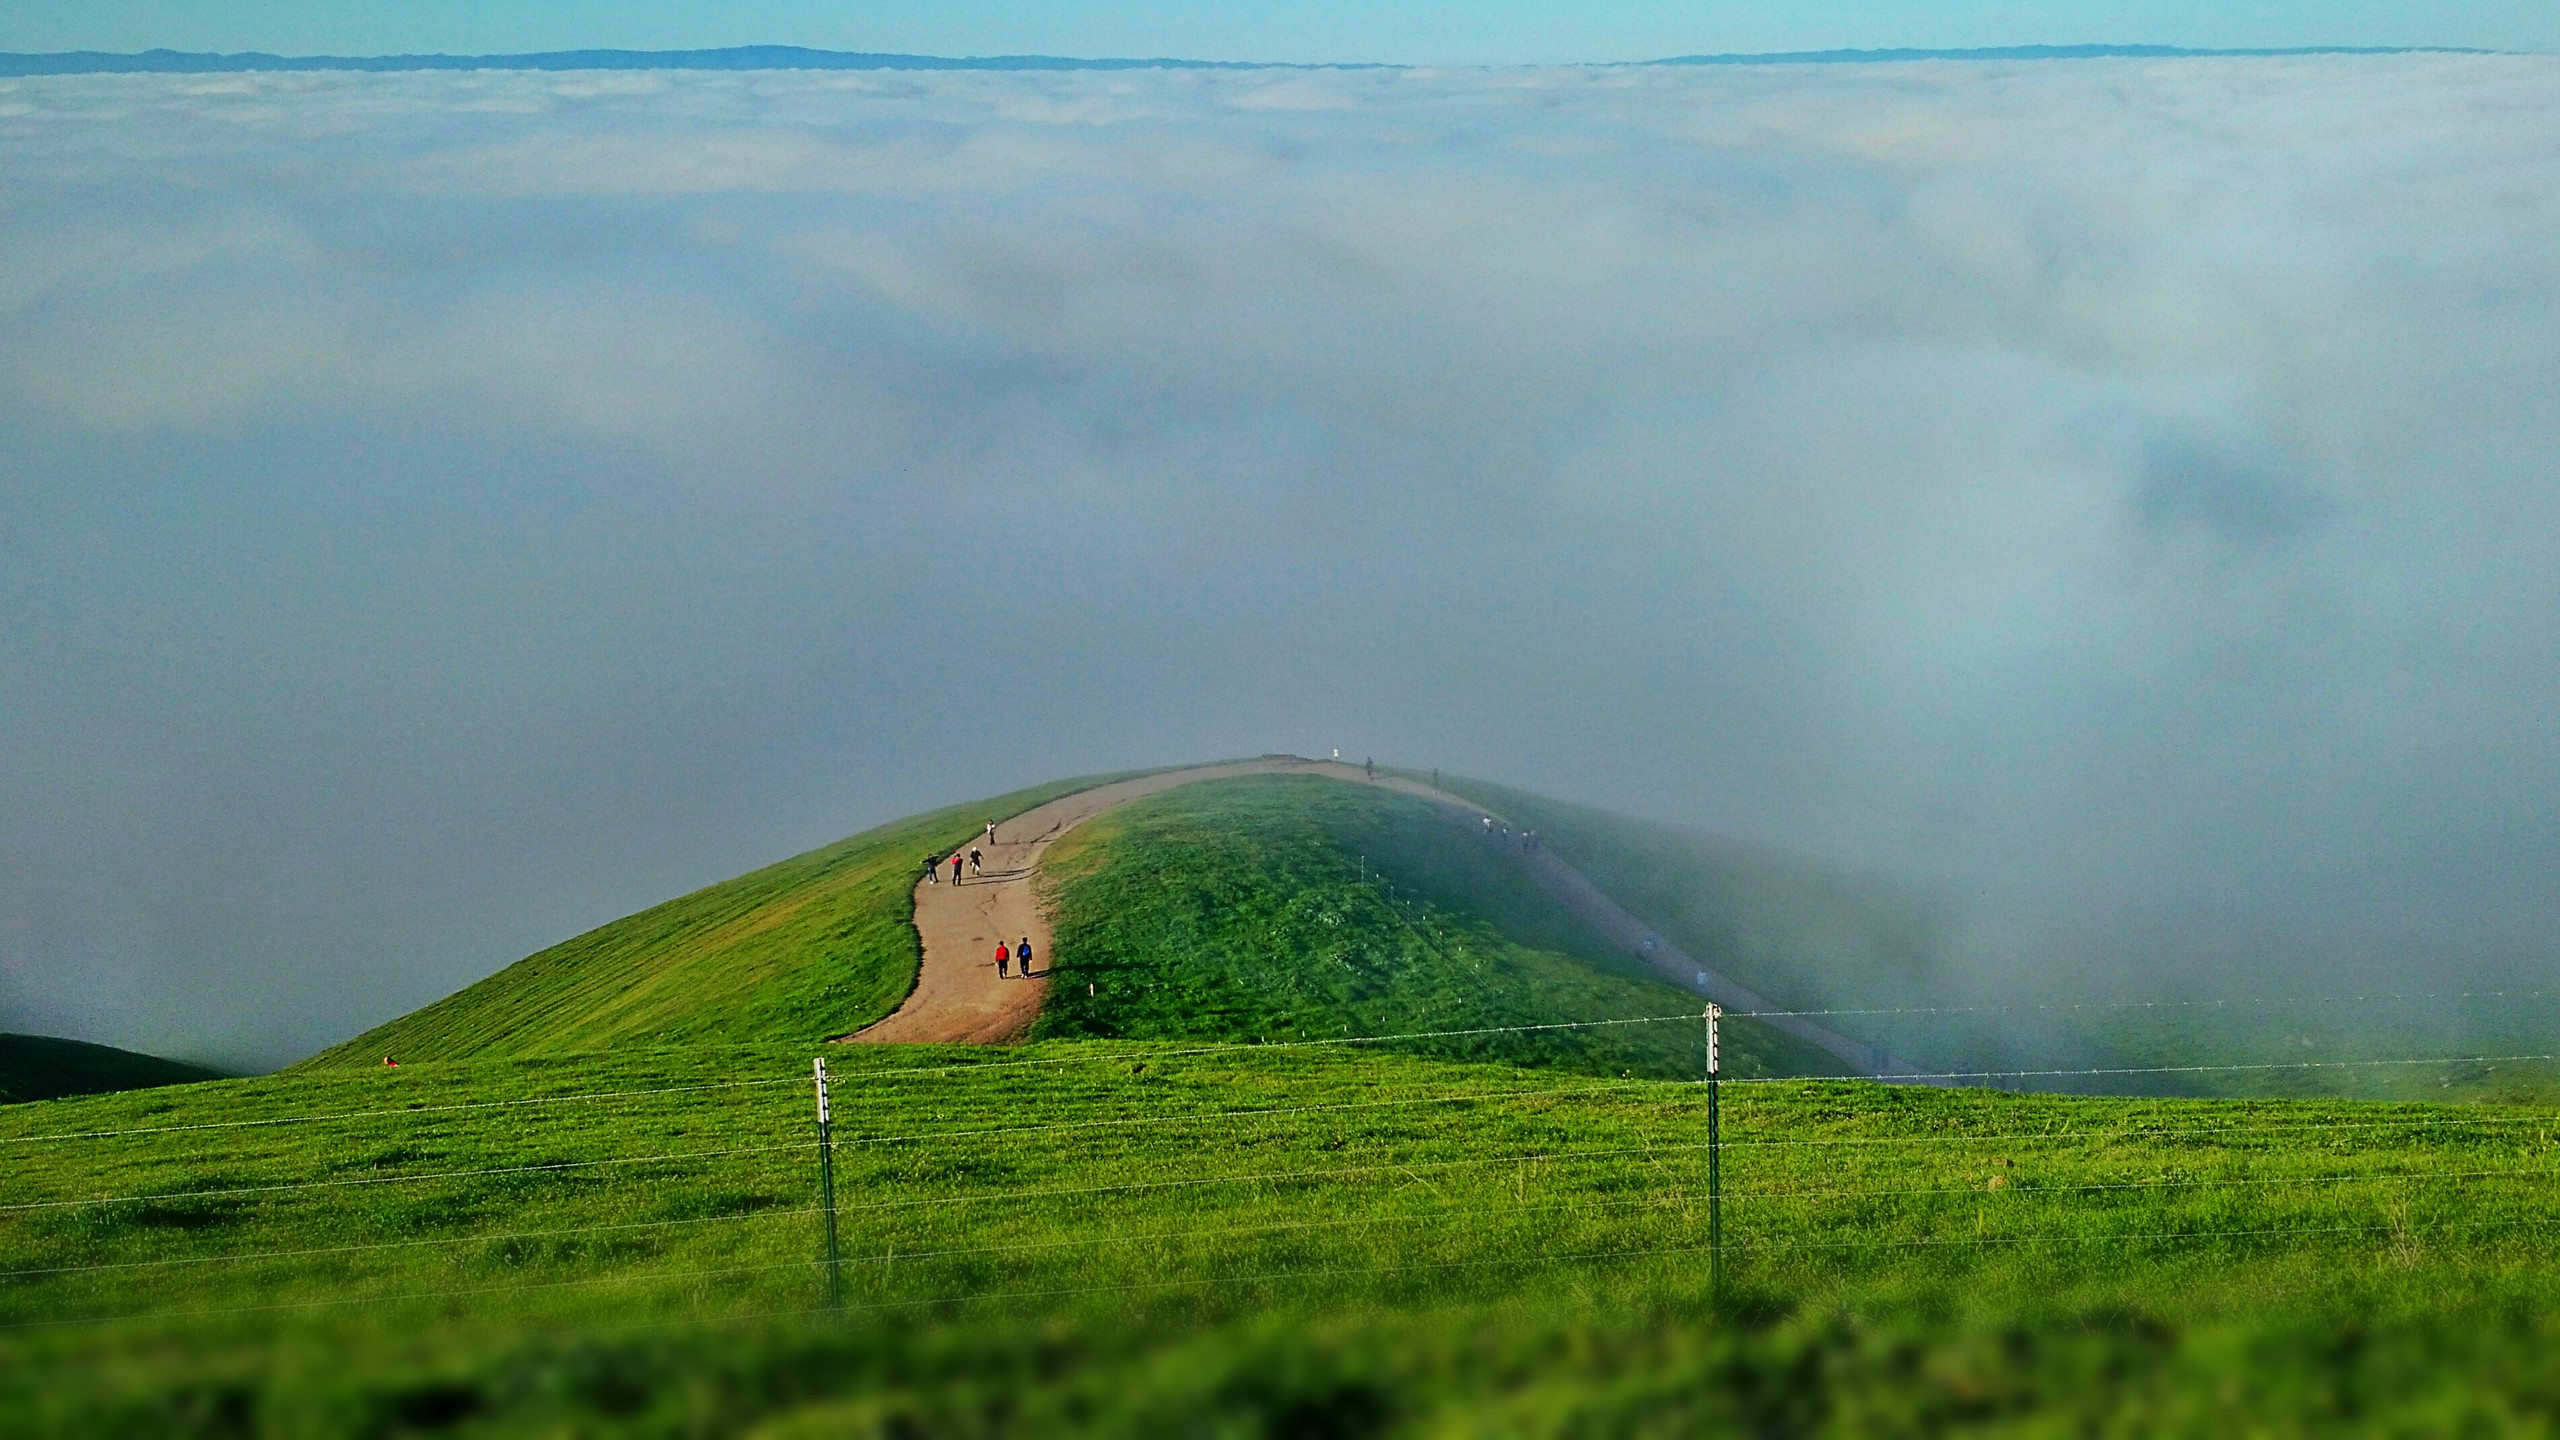 Botpost Bot Above The Clouds At Mission Peak Regional Preserve